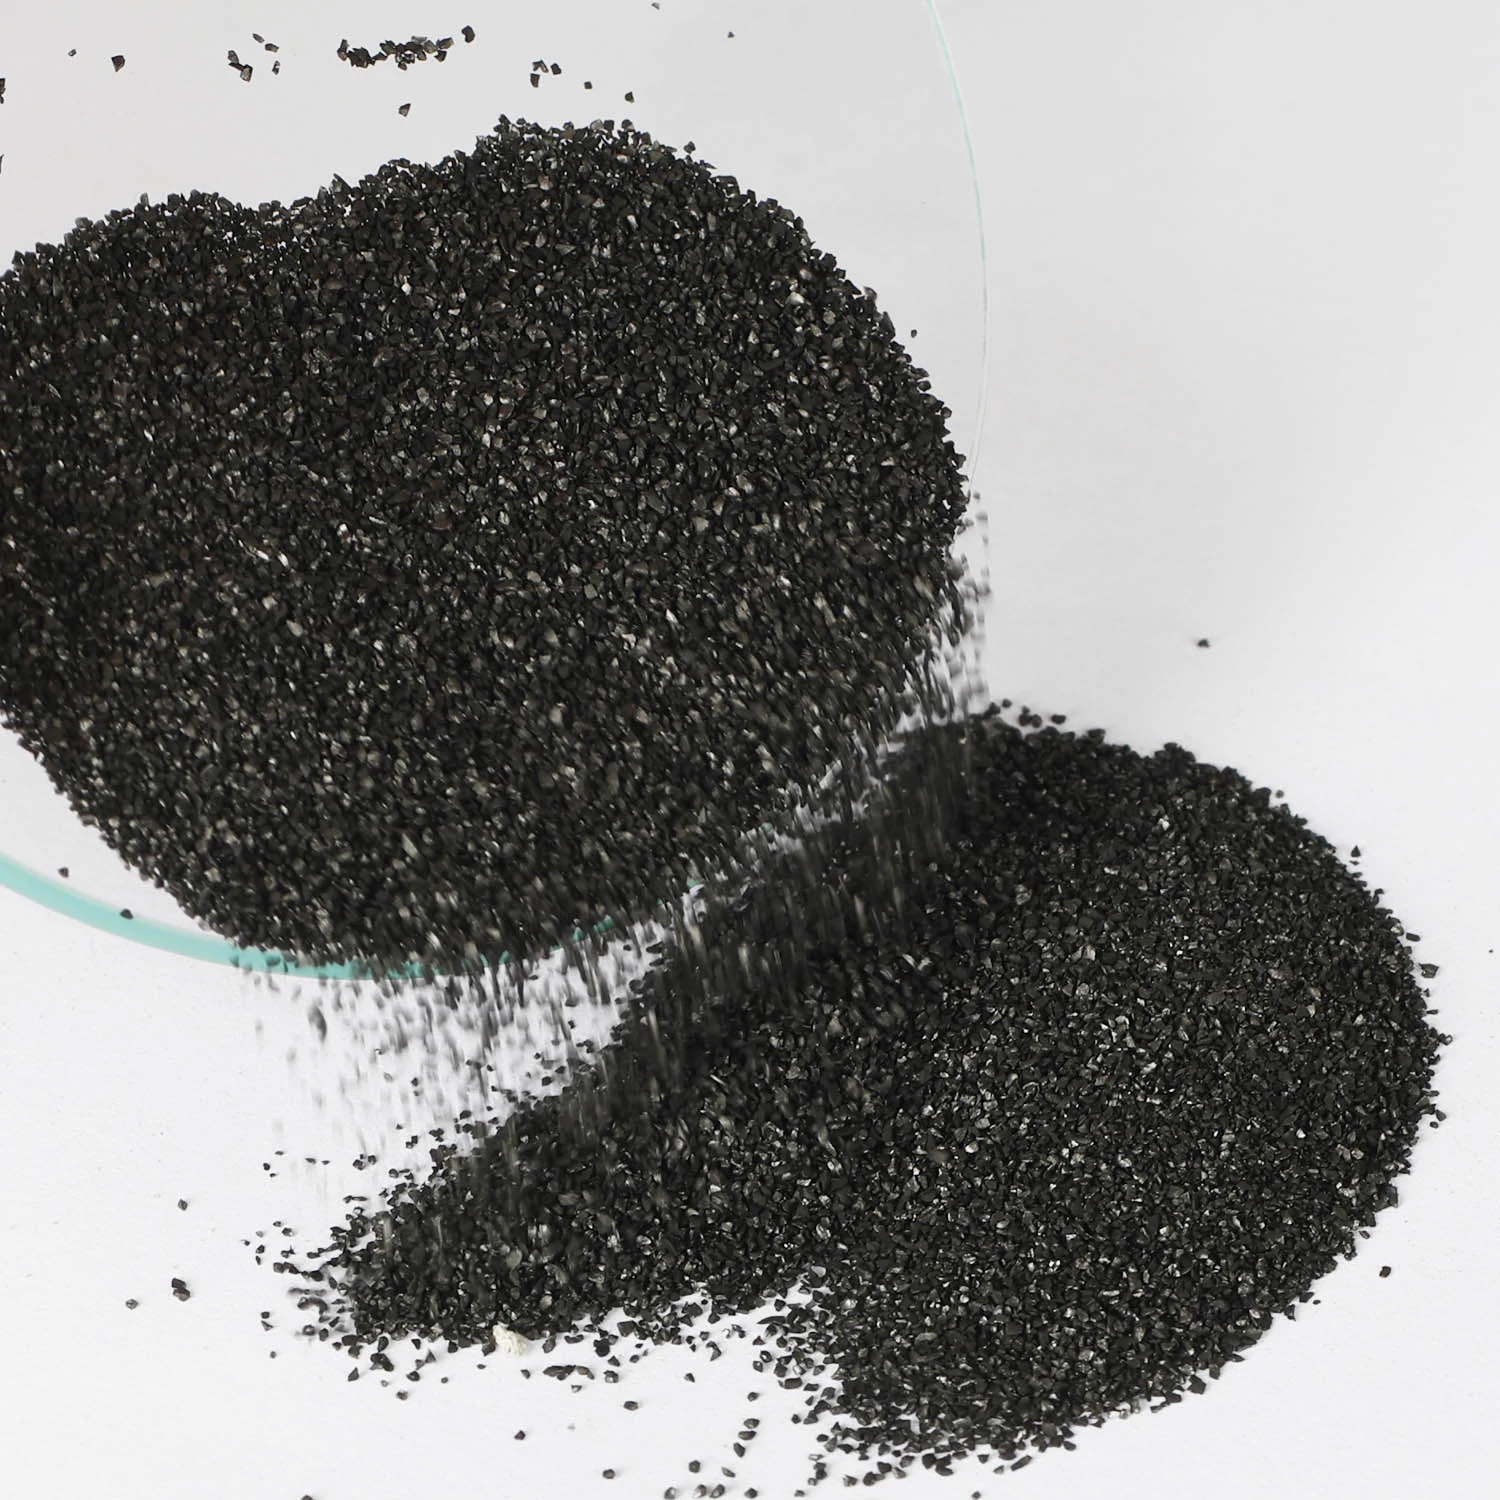 1000 Mg Per G Iodine Adsorption Value Black Coconut Shell Granular Activated Carbon Mainly Used in Poe Water Treatment